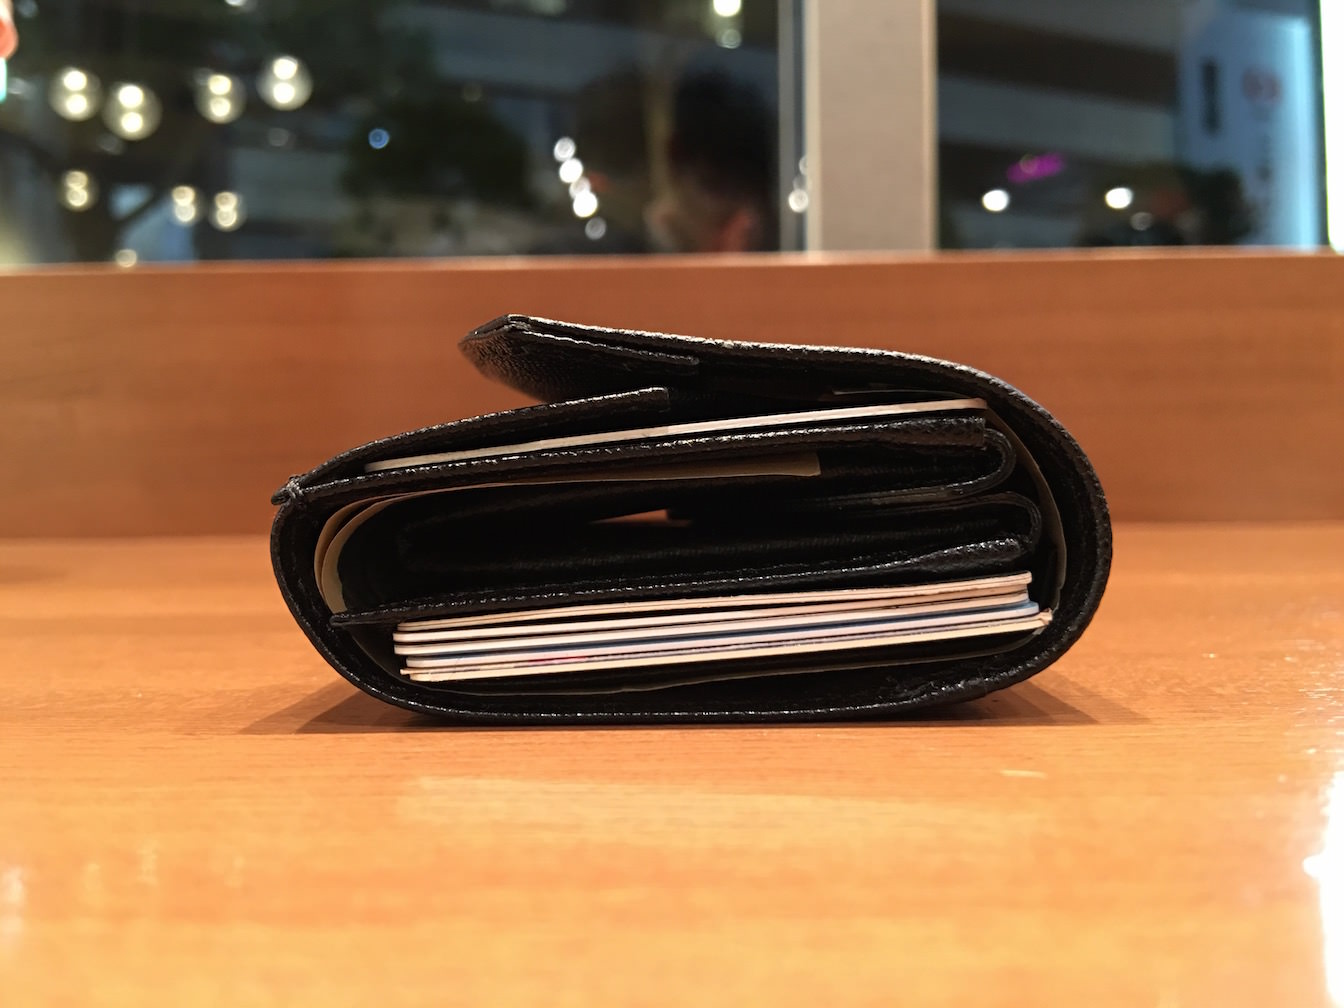 Review of hammock wallet compact 6